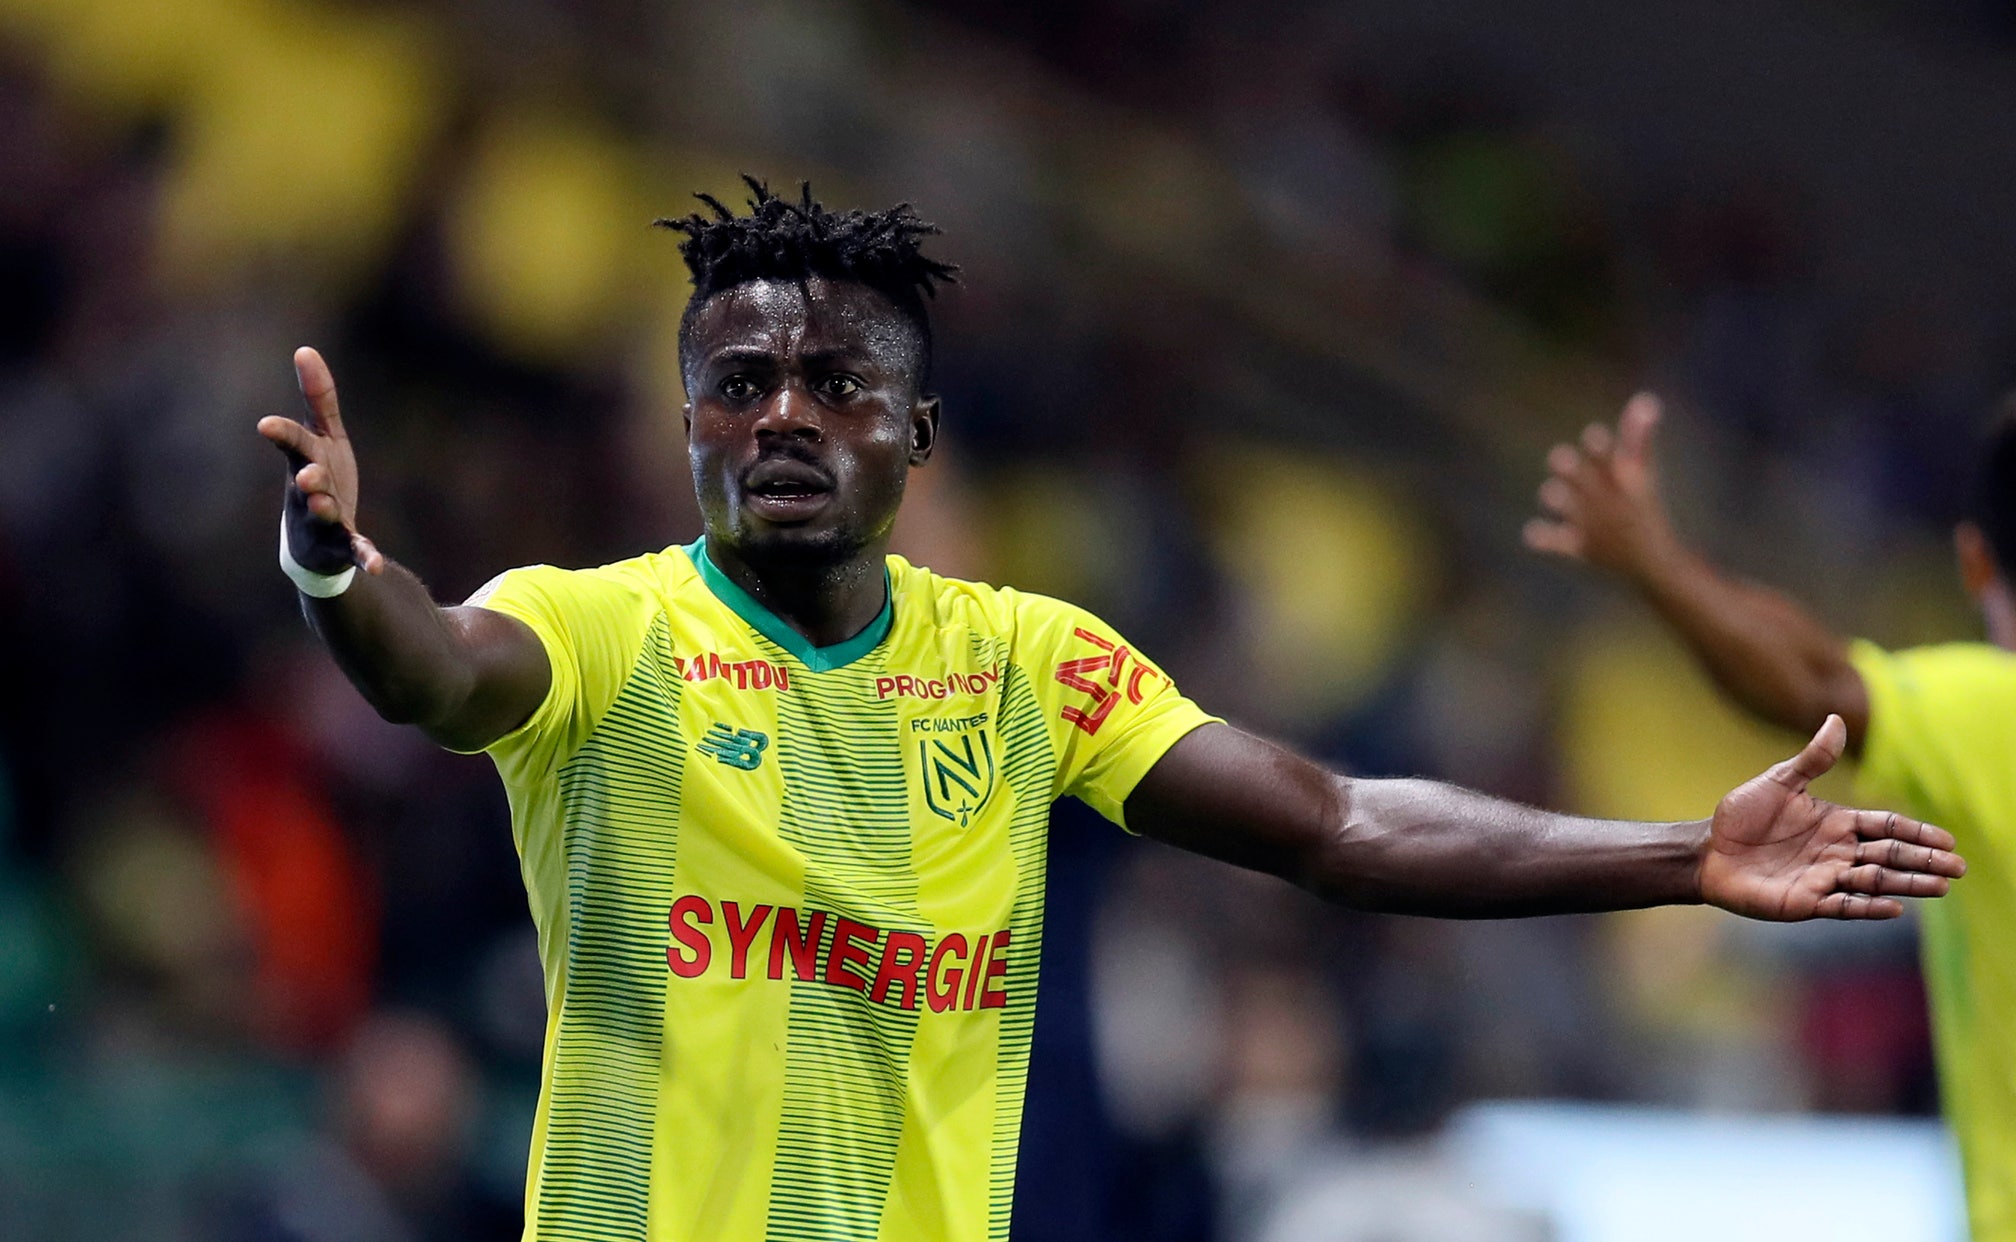 Nantes signs forward Moses Simon on 4-year deal from Levante | FOX Sports